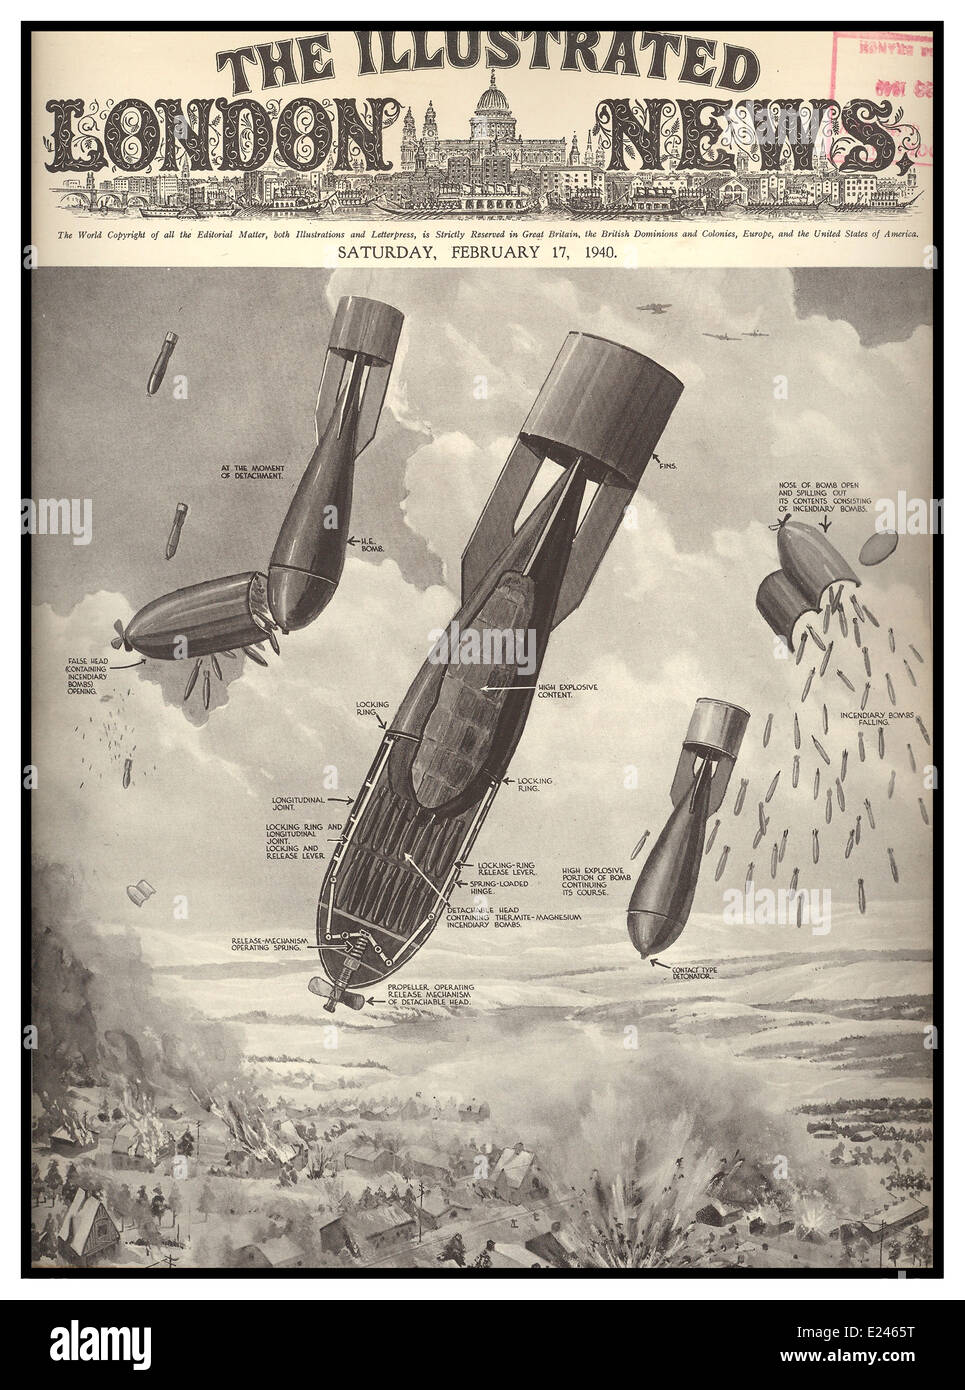 LONDON BLITZ NEWS BOMBS February 17th 1940 Front cover of Illustrated London News showing the  inner workings of German bombs raining down on London Stock Photo